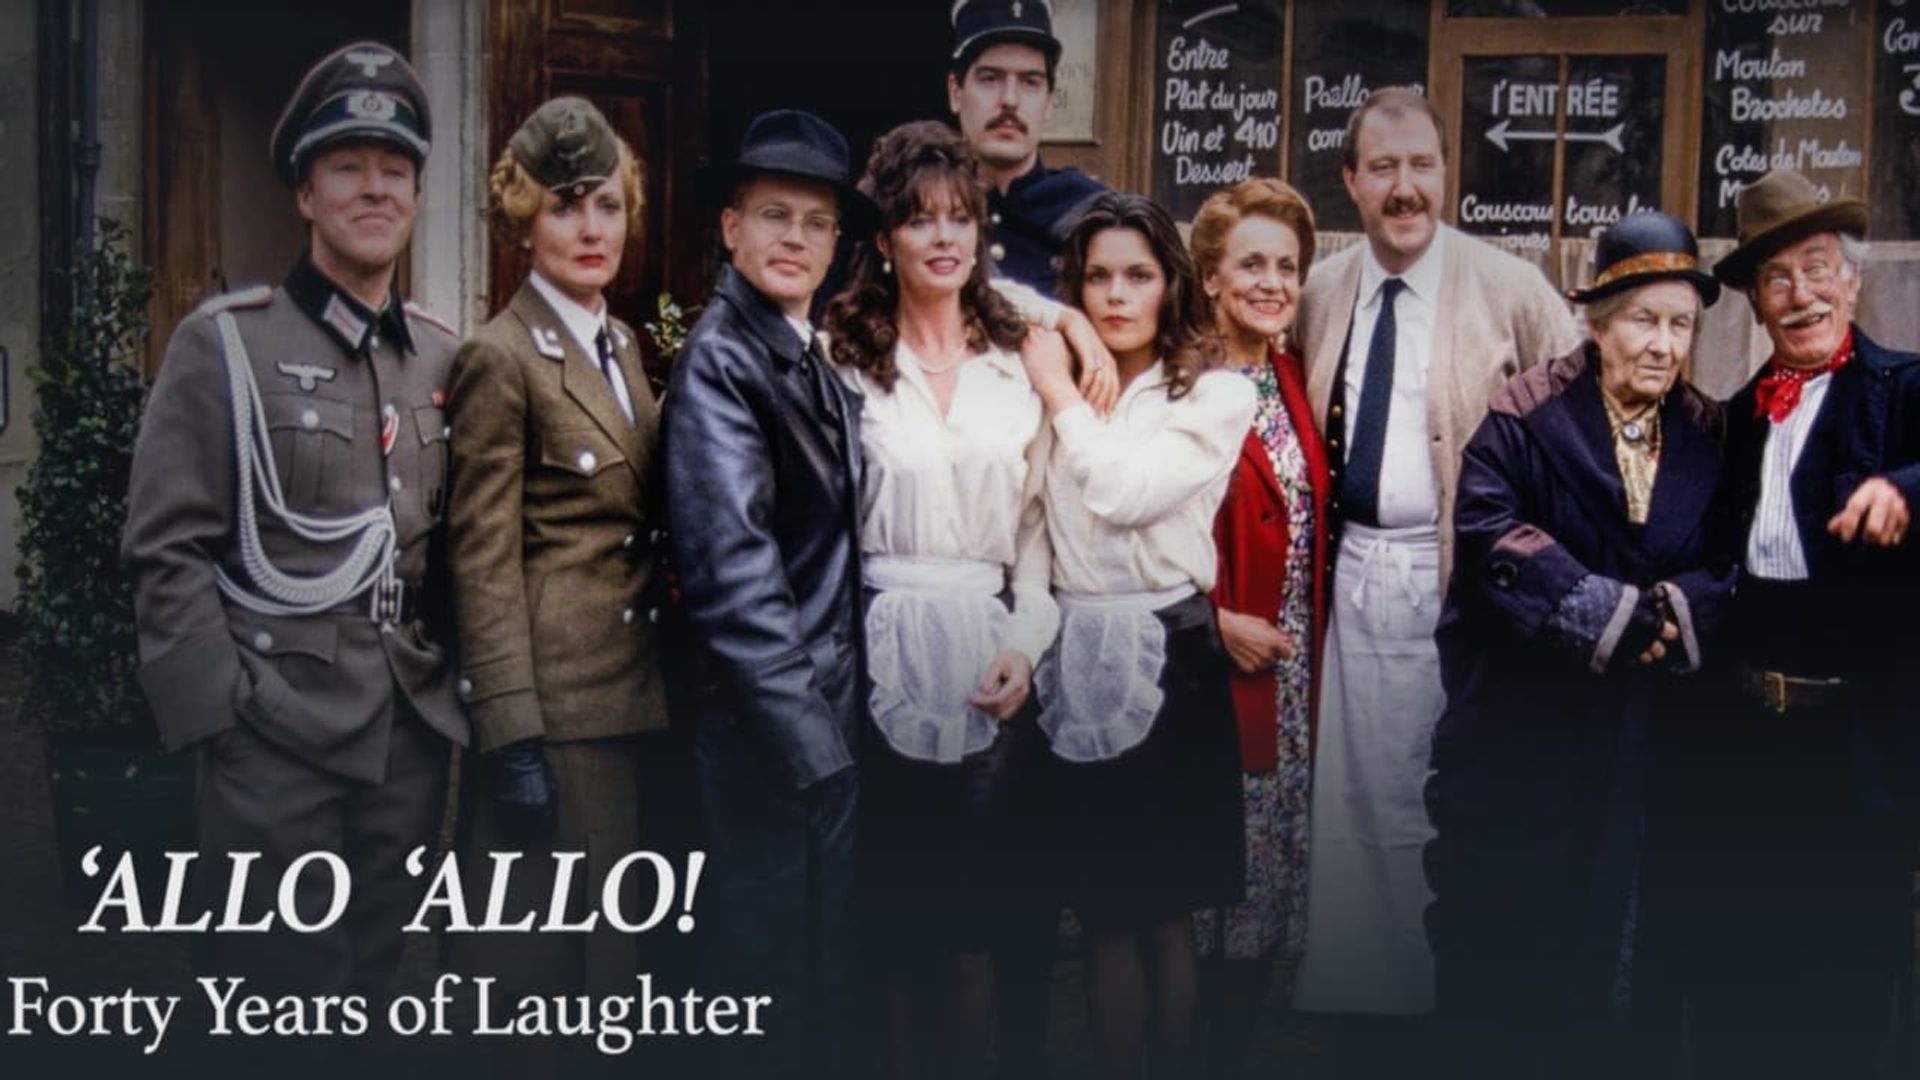 'Allo 'Allo! Forty Years of Laughter background